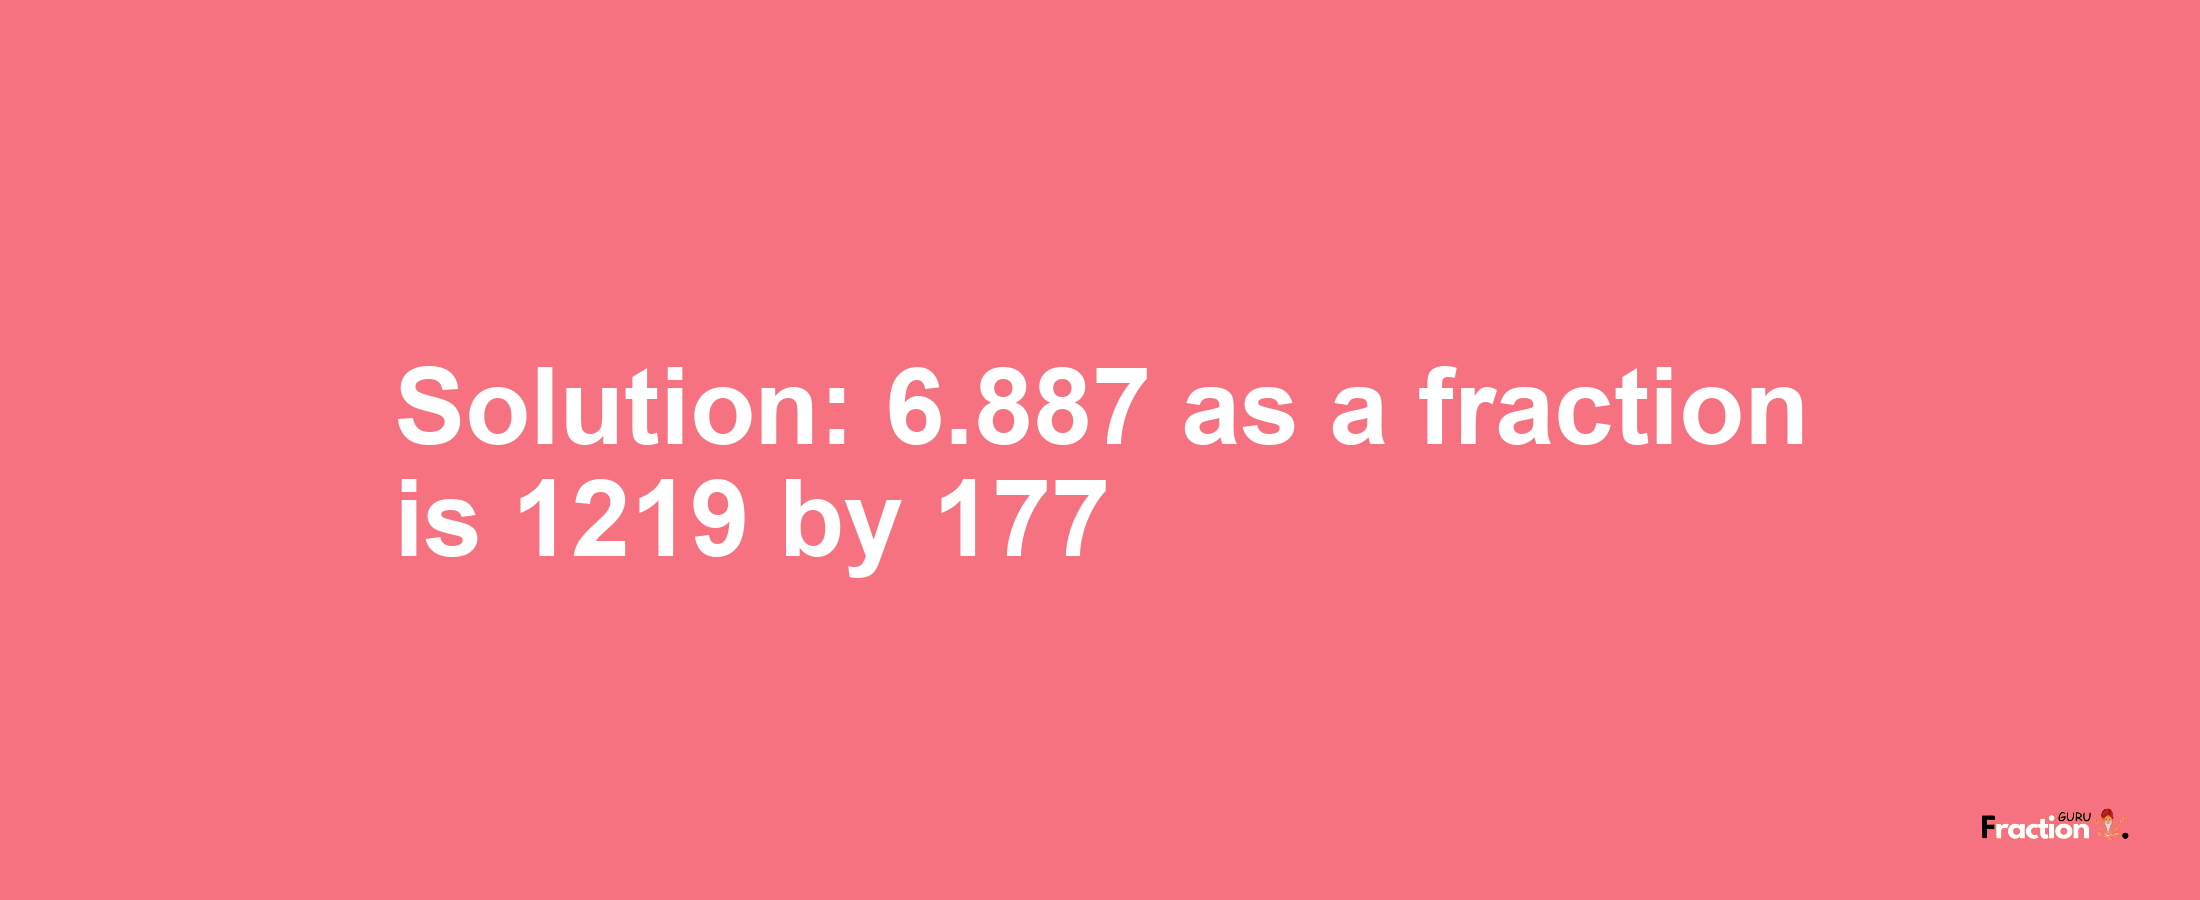 Solution:6.887 as a fraction is 1219/177